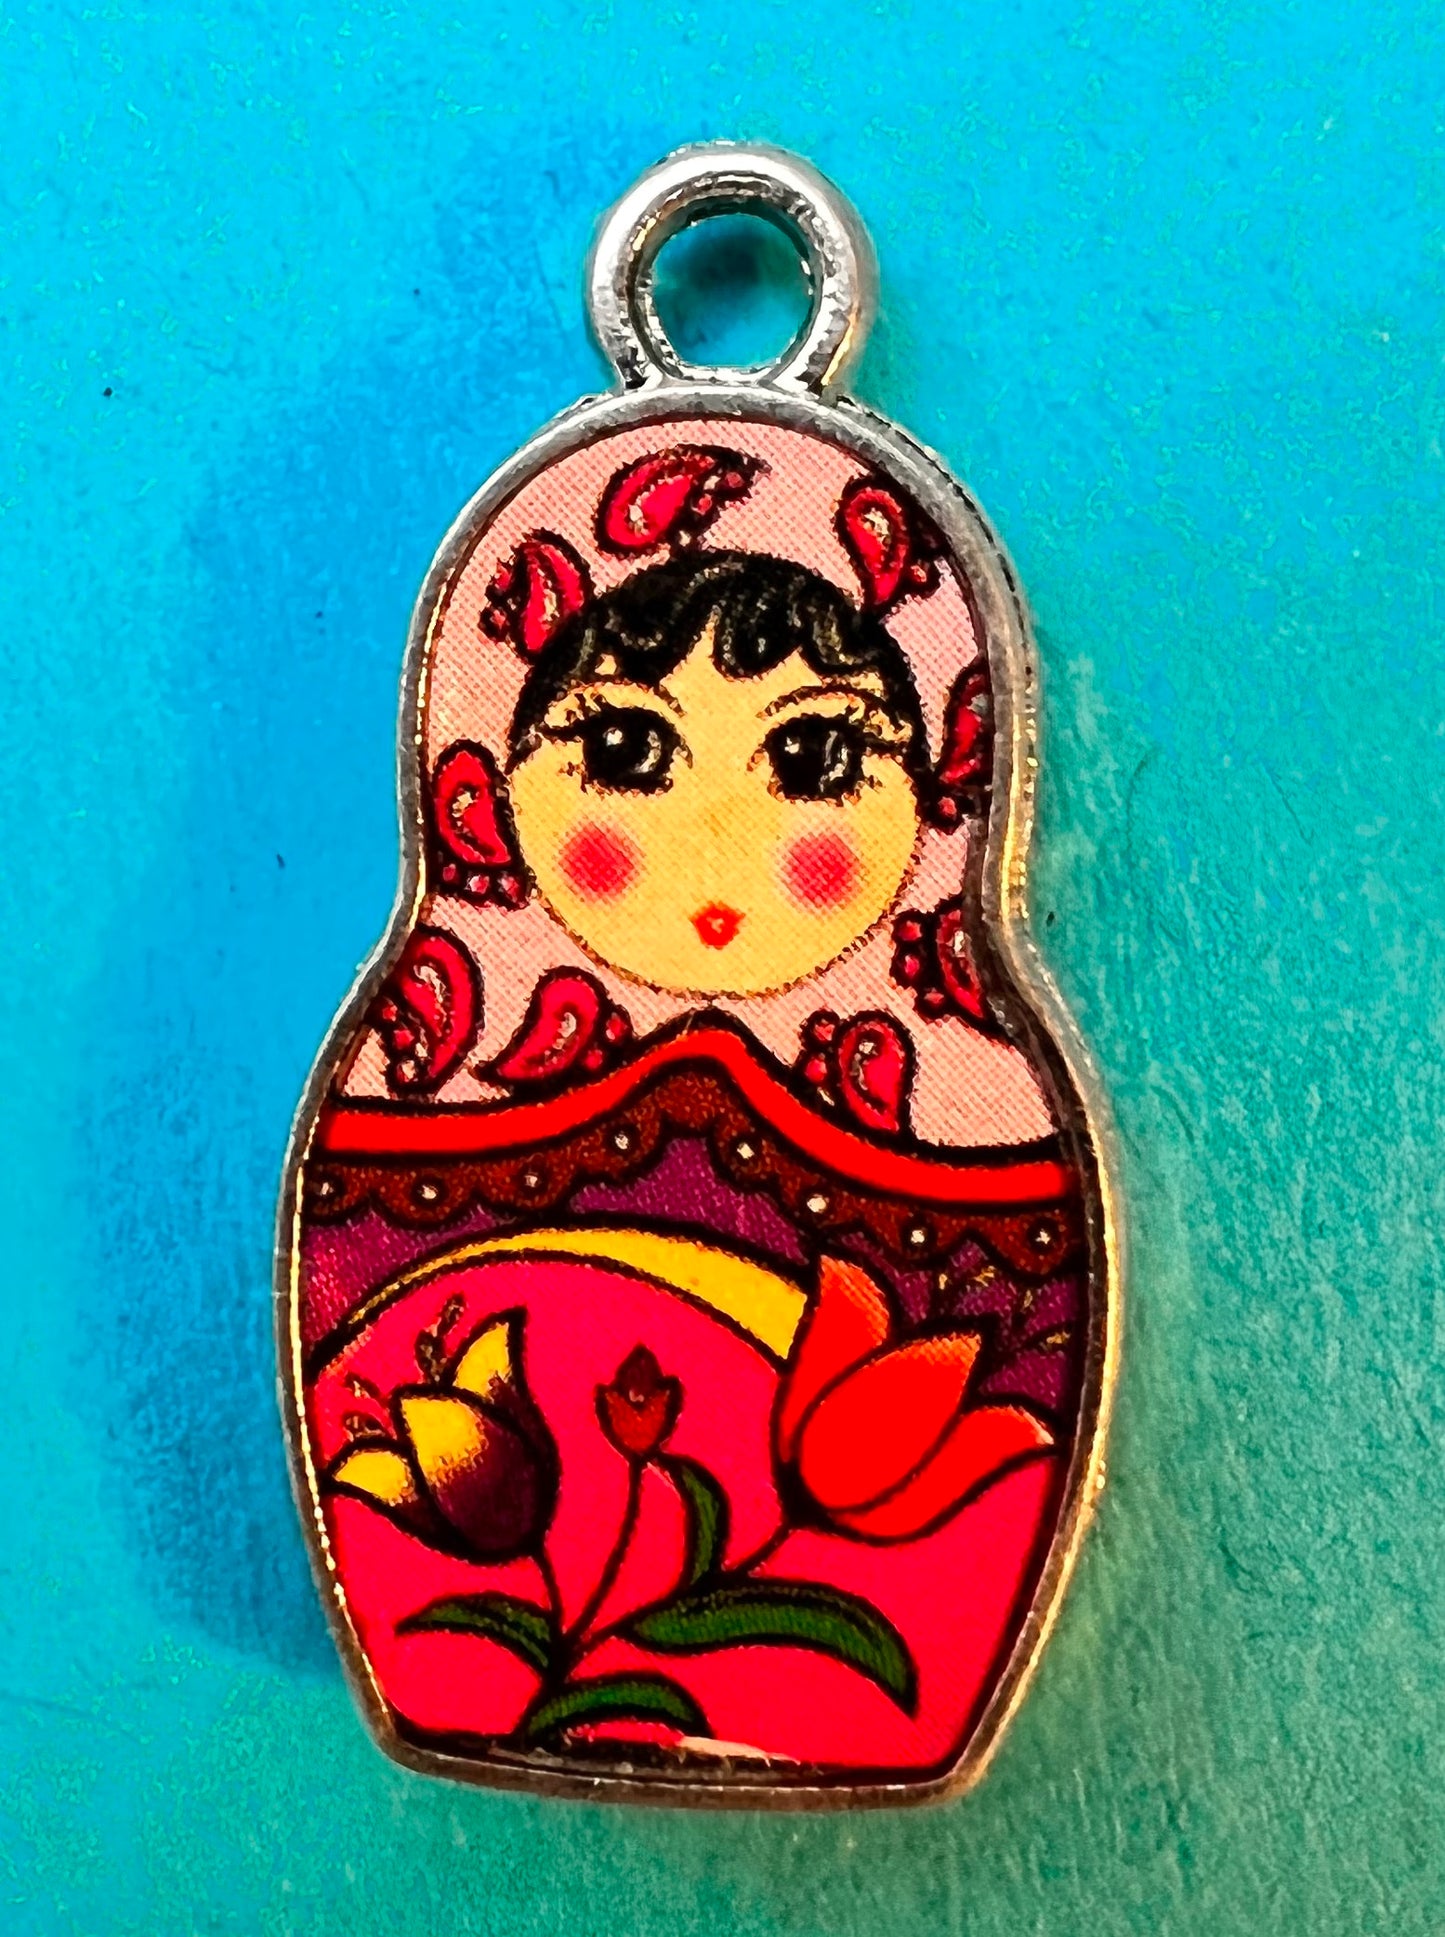 Delightful Russian Doll Enamel Charms / Pendants - 2.4cm tall - Choice of Colours